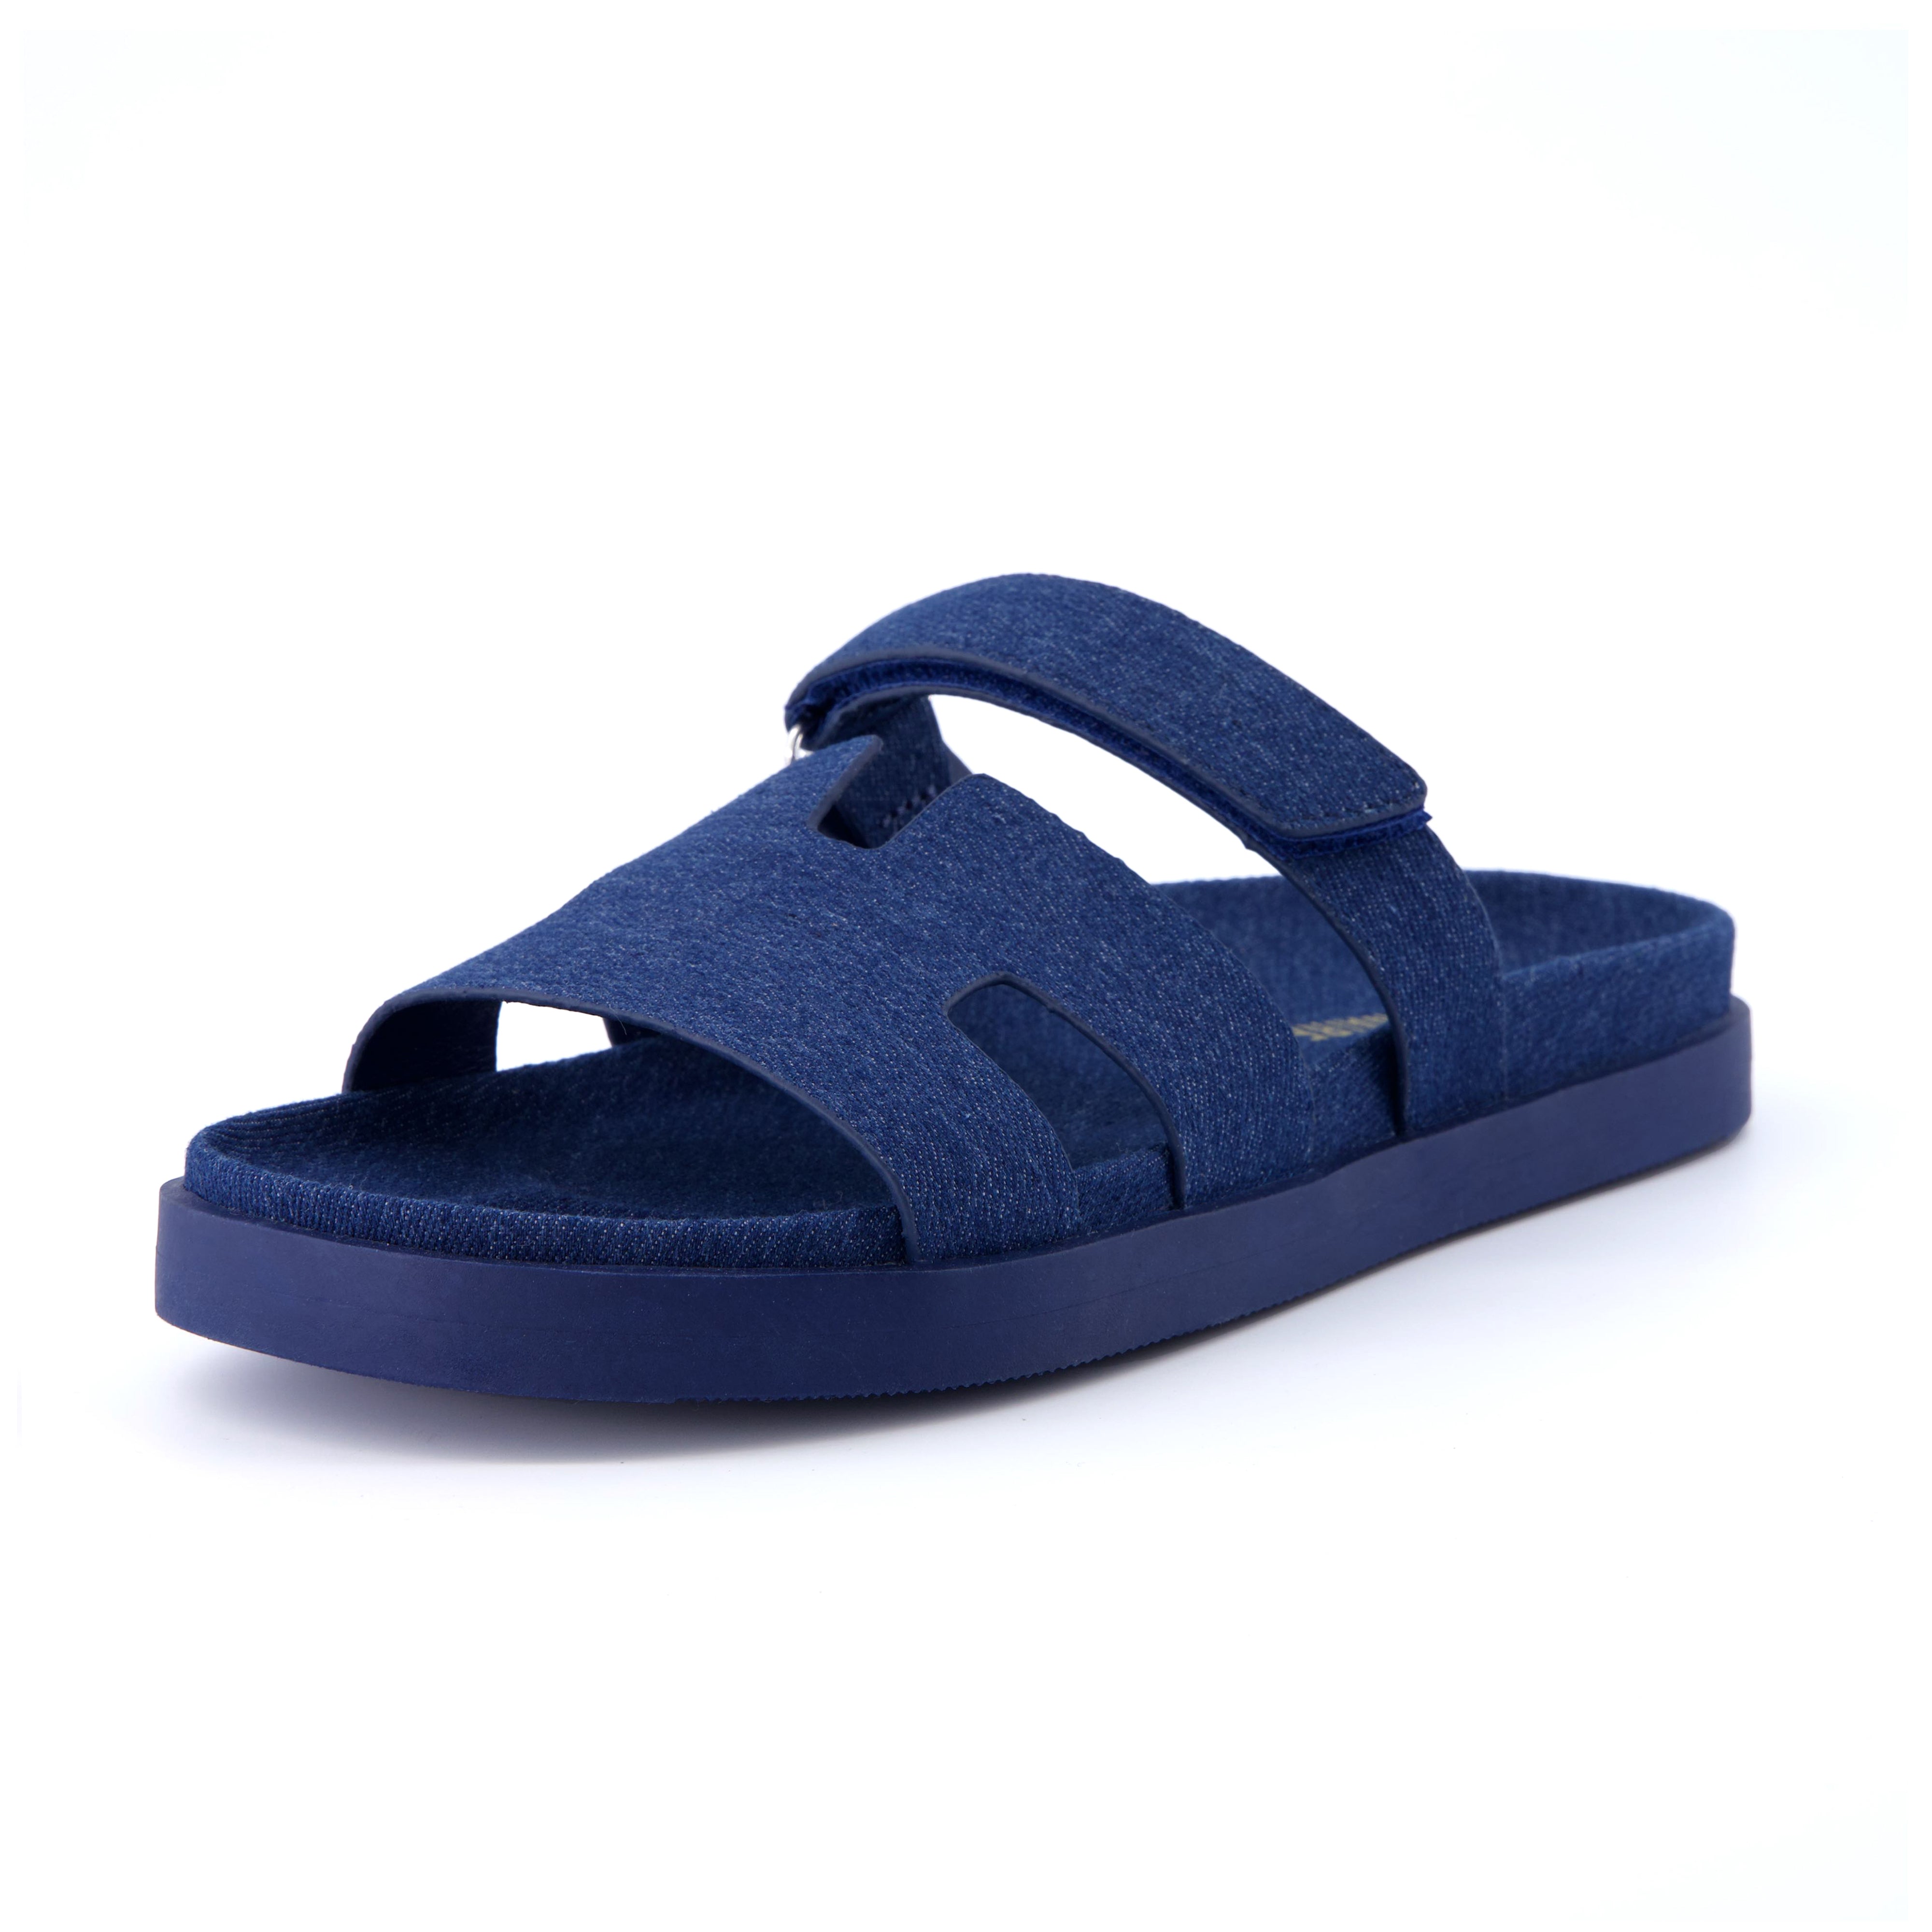 Lotto Footbed Sandal Brights